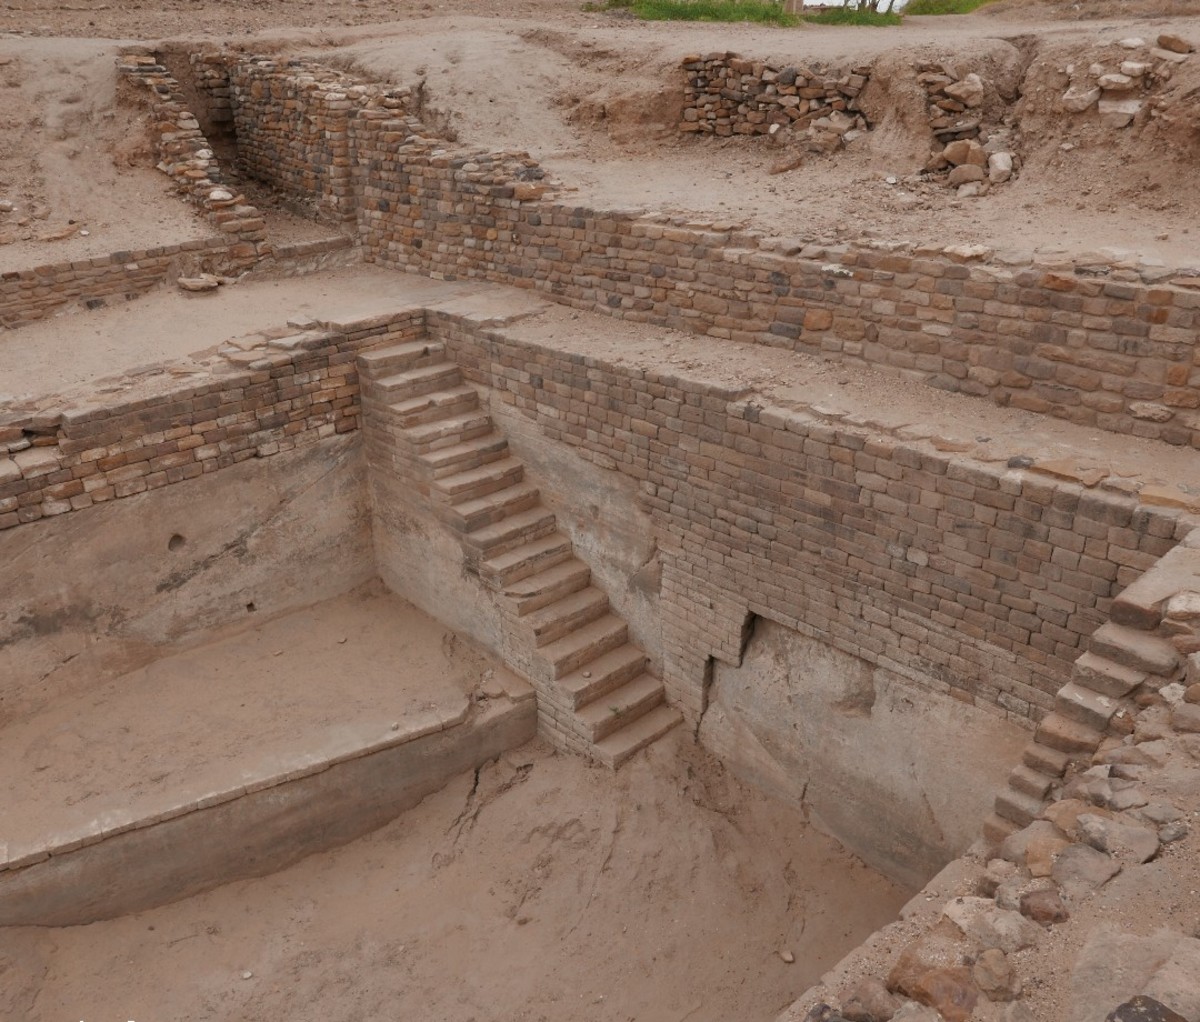 Dug-out ruins from fortified city of Dholavira that was last occupied 3,500 years ago.